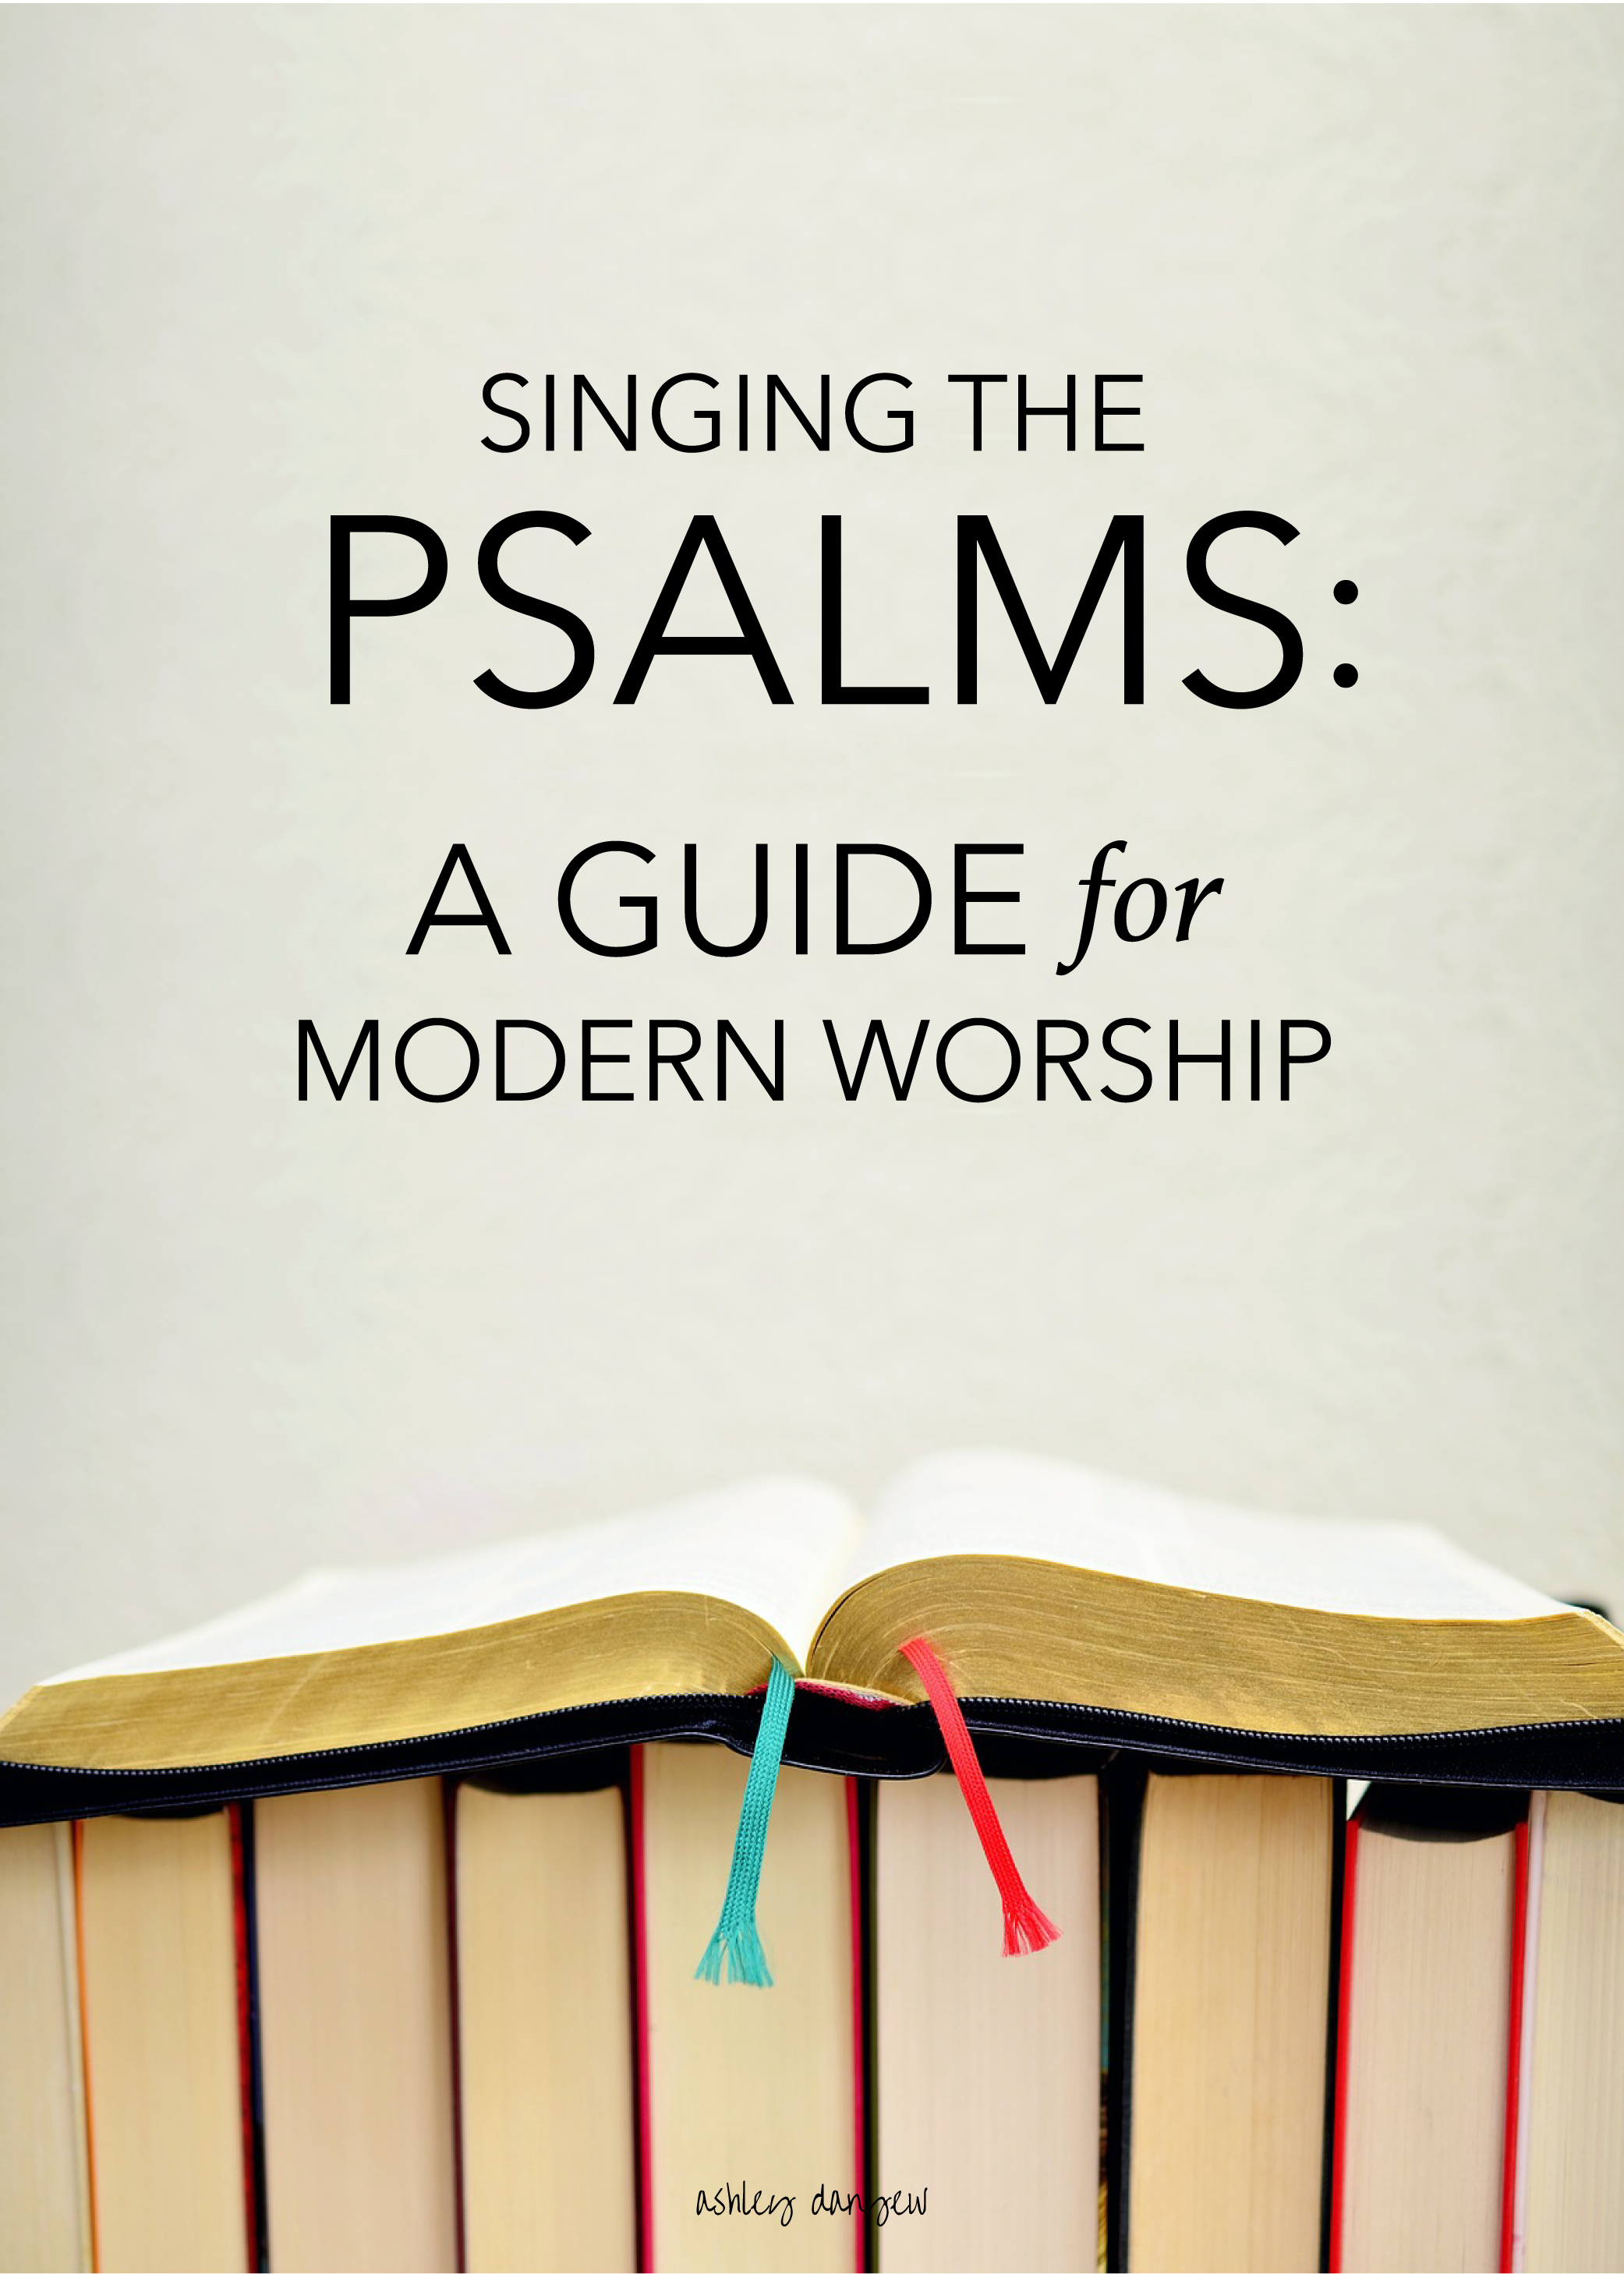 Copy of Singing the Psalms: A Guide for Modern Worship